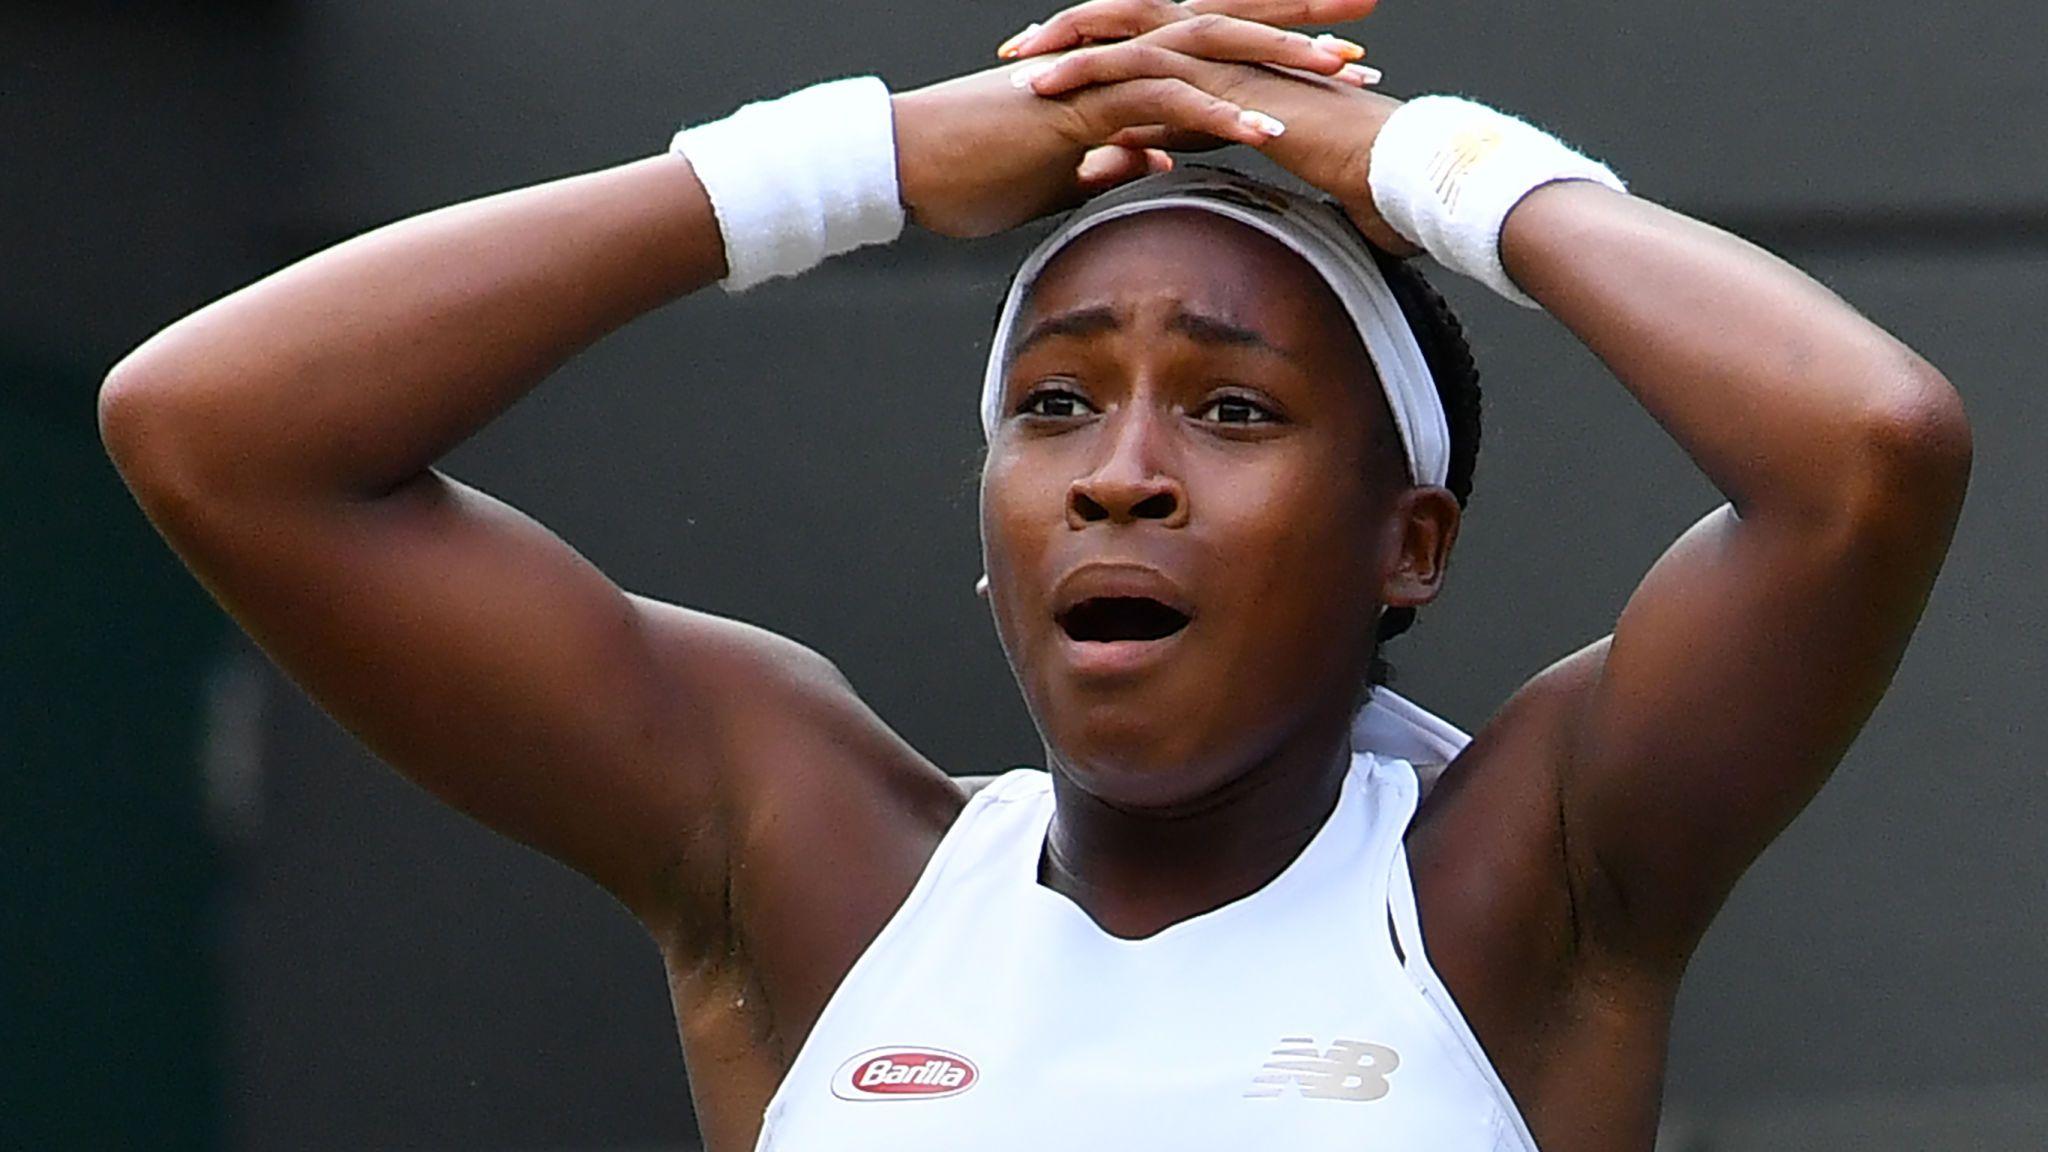 Will Coco Gauff shake things up at US Open?